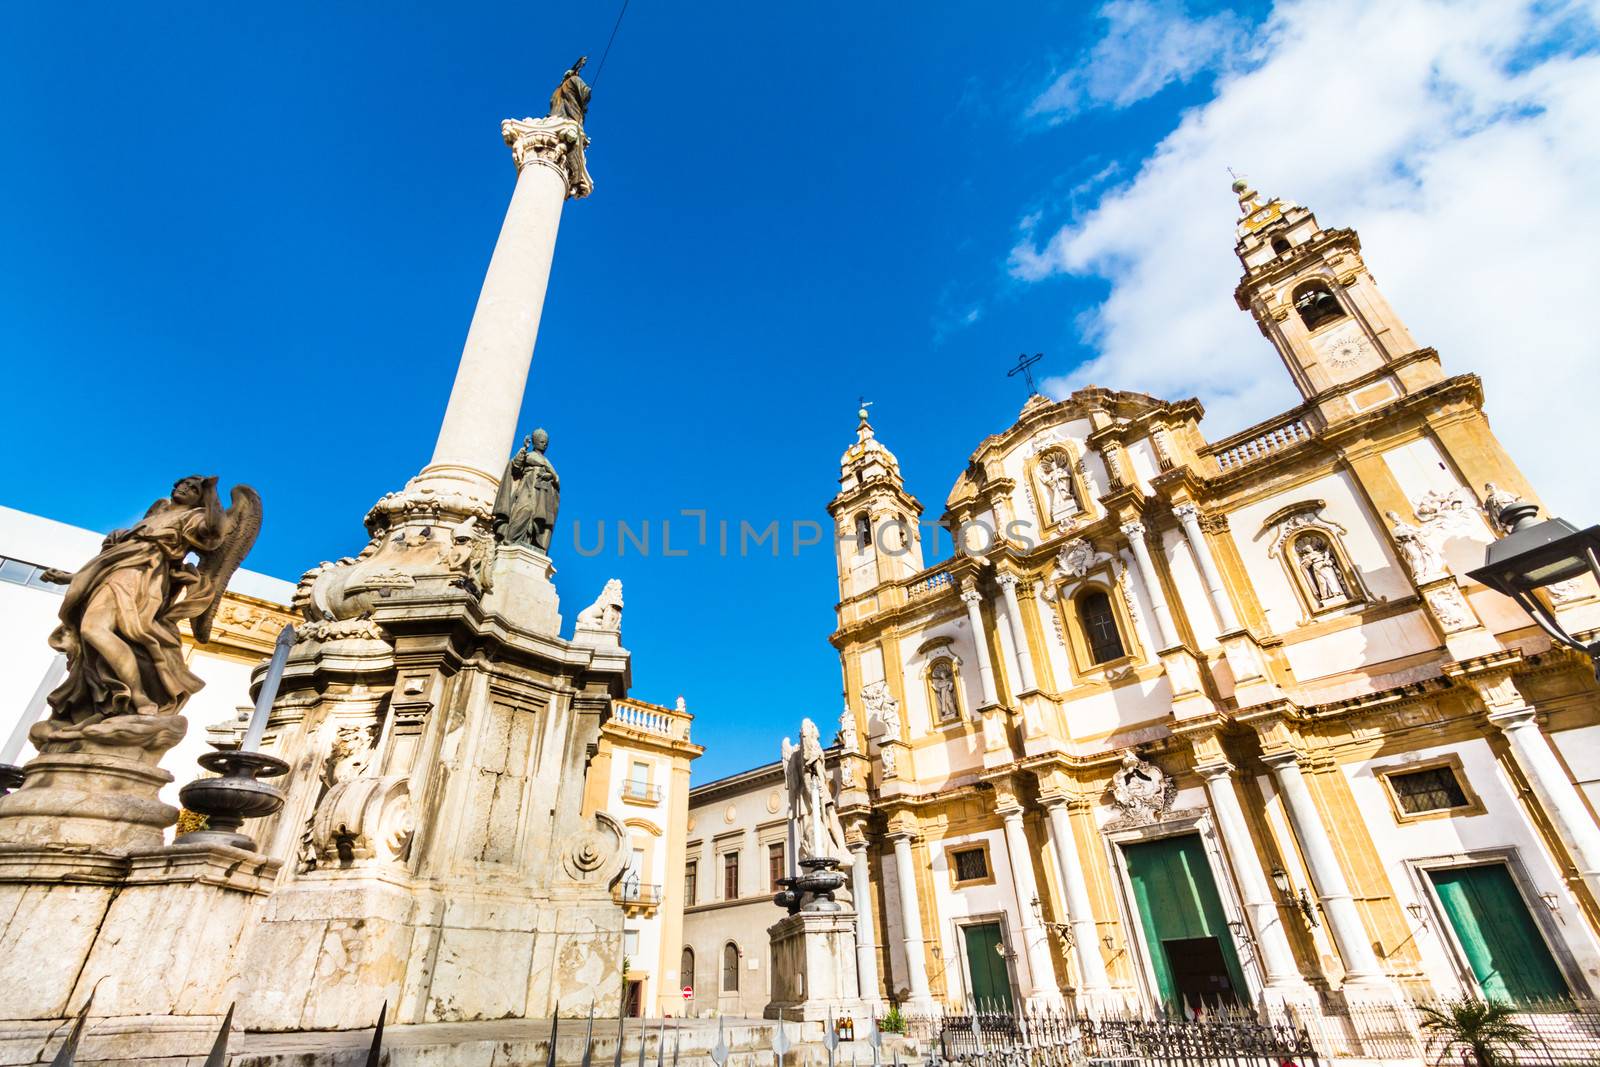 Church of Saint Dominic in Palermo, Italy, is the second in importance only to the Cathedral and is located in the Saint Dominic square,in the neighborhood of La Loggia.